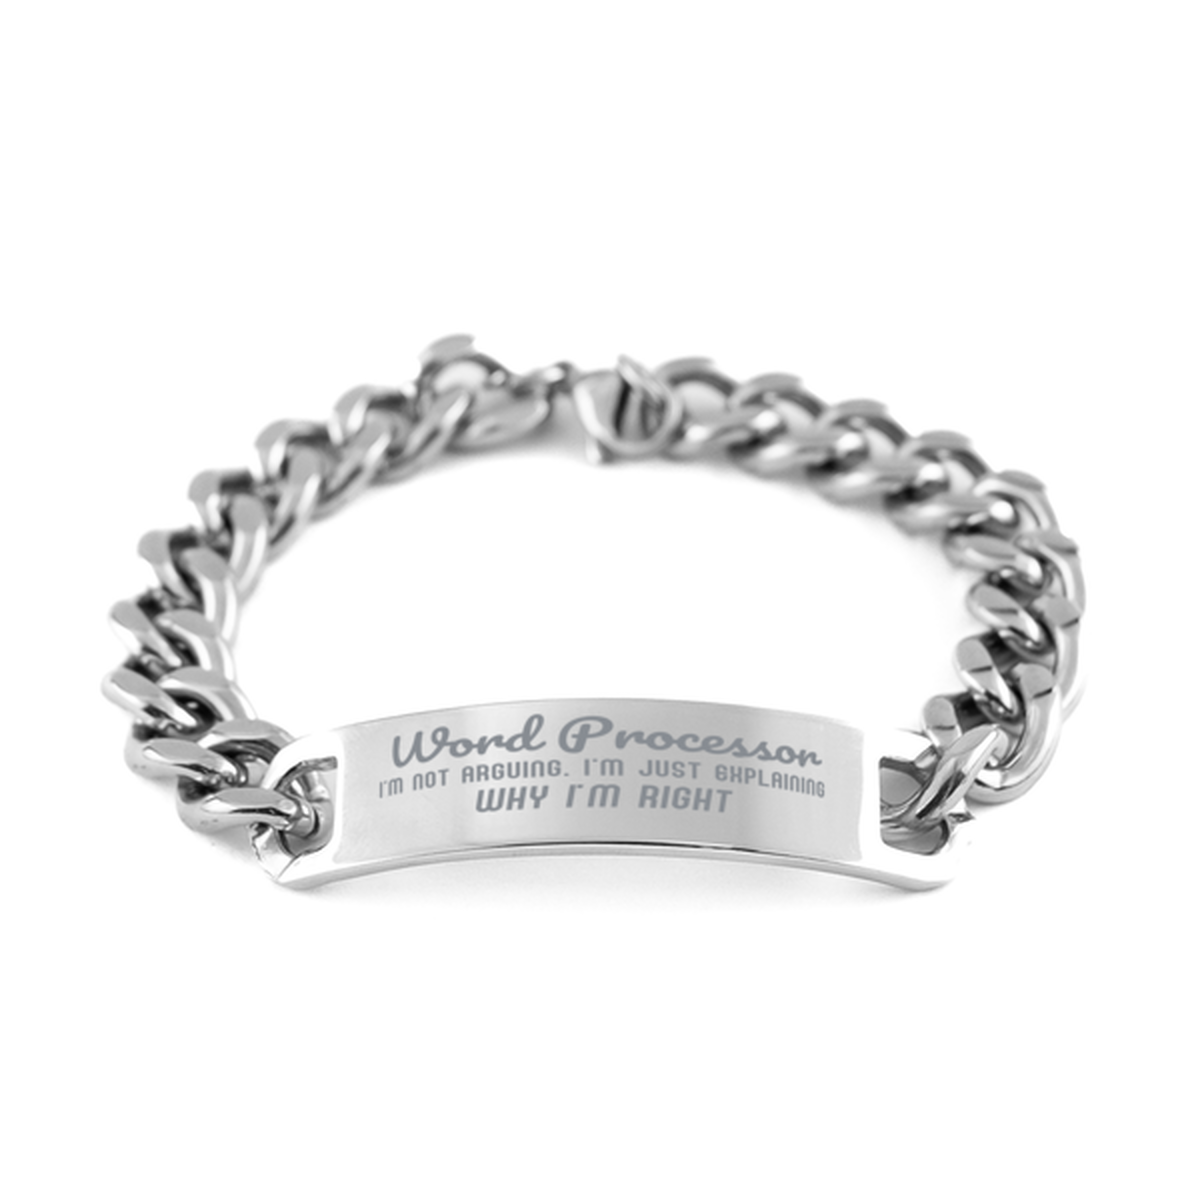 Word Processor I'm not Arguing. I'm Just Explaining Why I'm RIGHT Cuban Chain Stainless Steel Bracelet, Graduation Birthday Christmas Word Processor Gifts For Word Processor Funny Saying Quote Present for Men Women Coworker